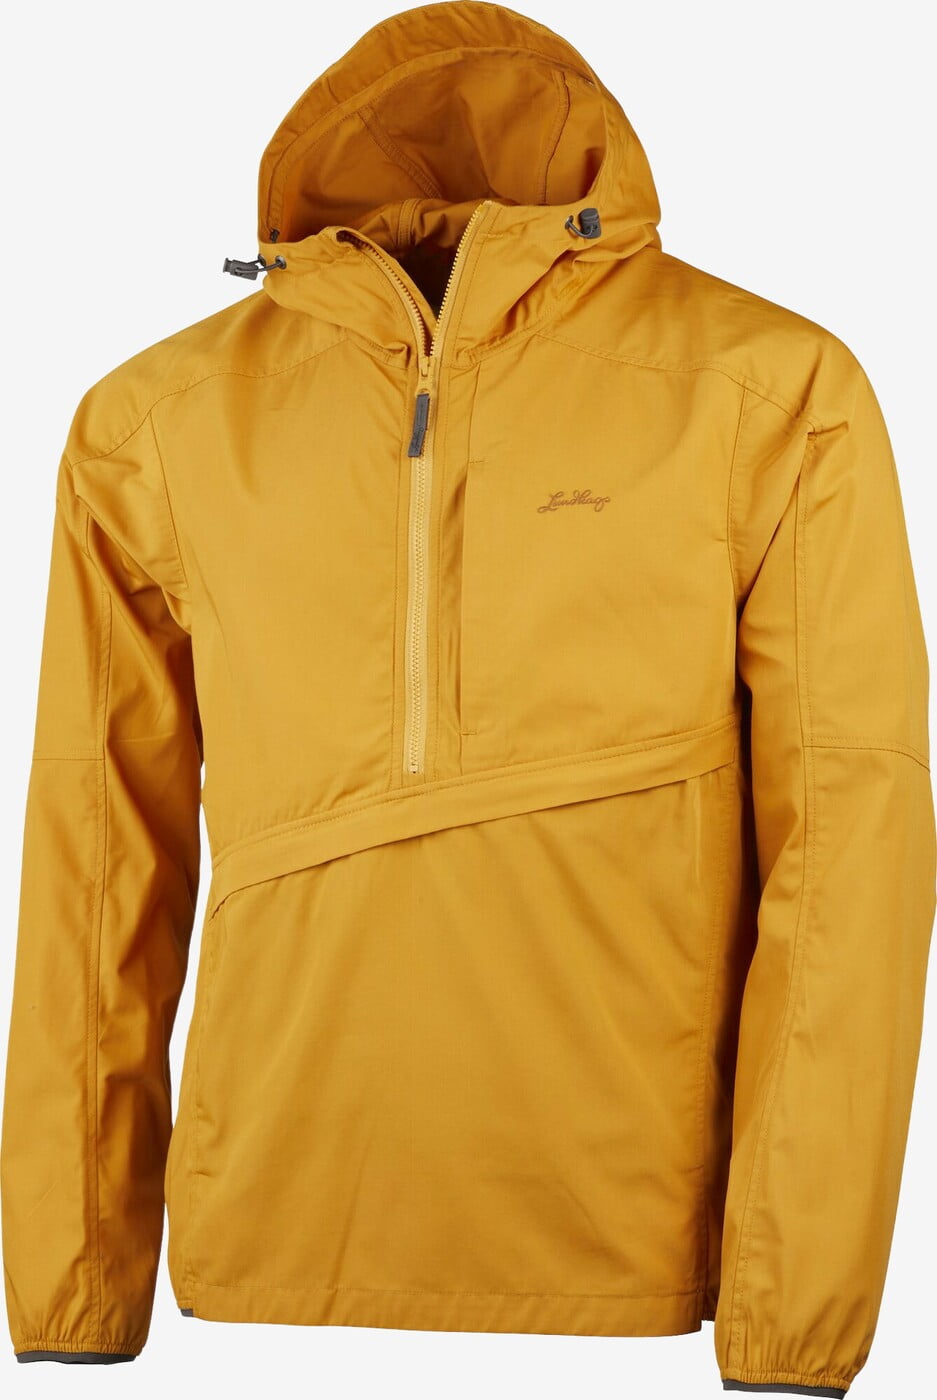 Lundhags - Gliss Ms Anorak (Gold) - M